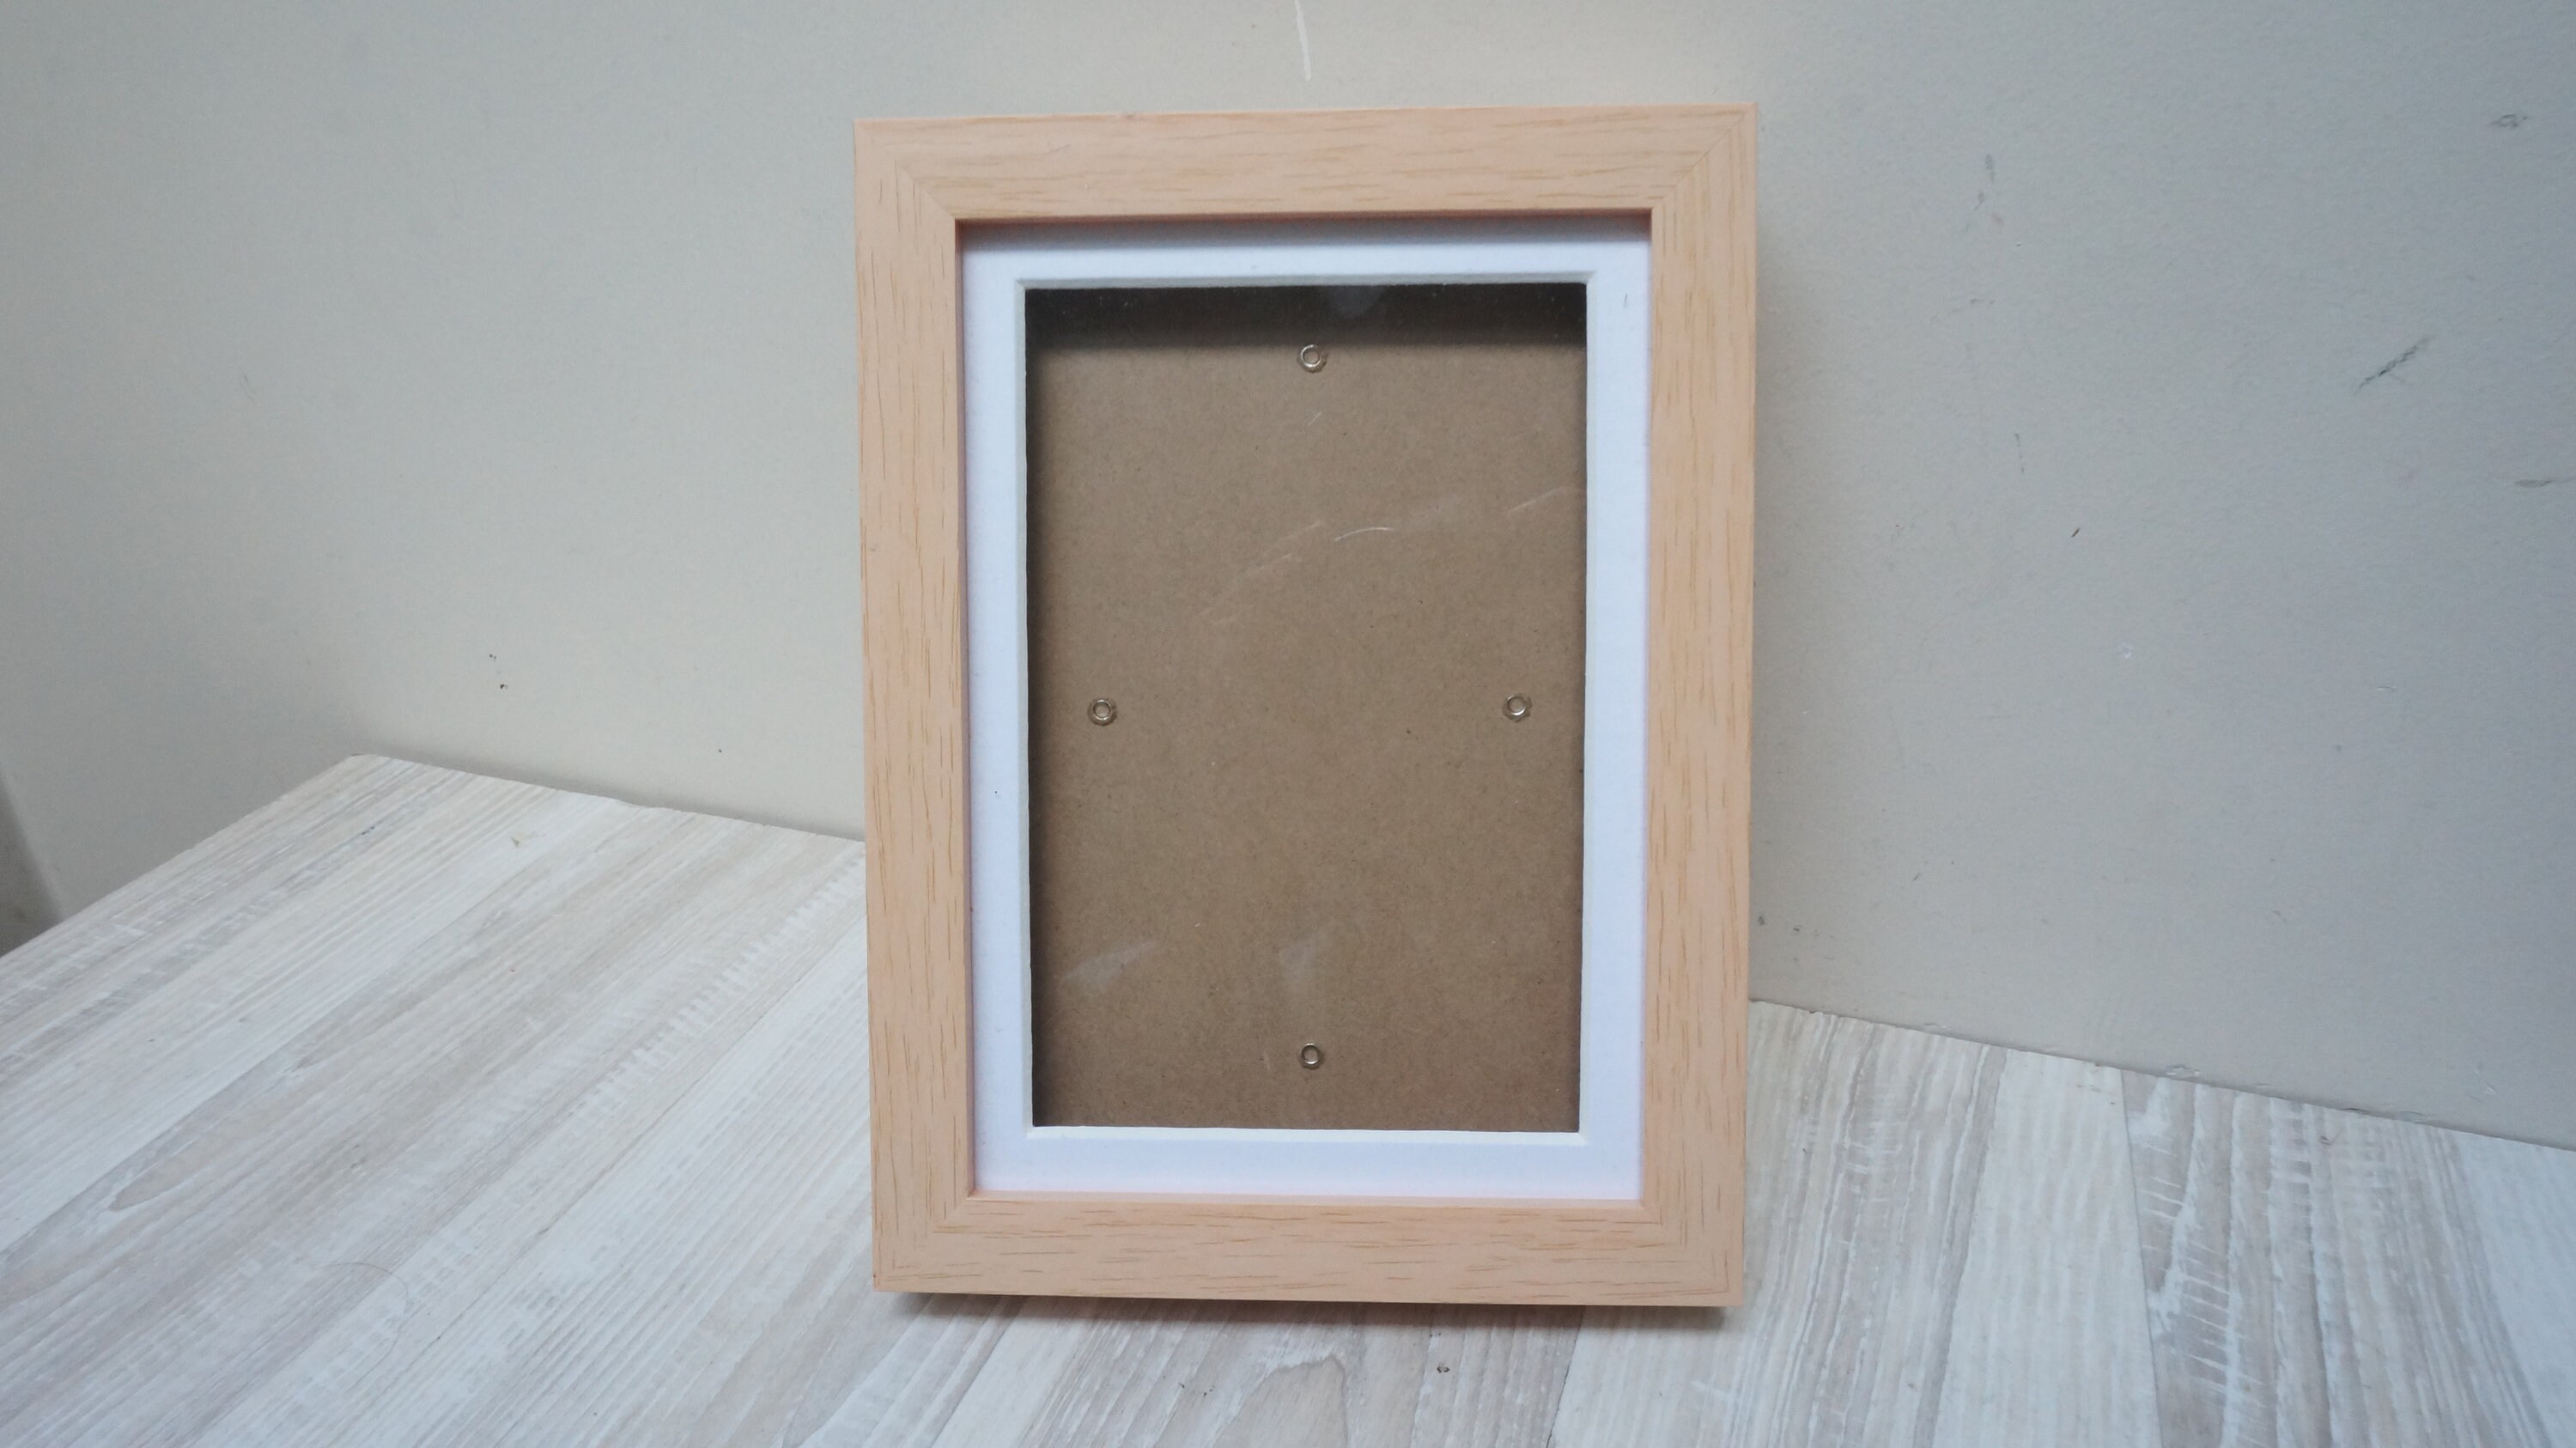 FL 002 S Wooden Photo Frame small - 15x20 cm - Funeral Products B.V.